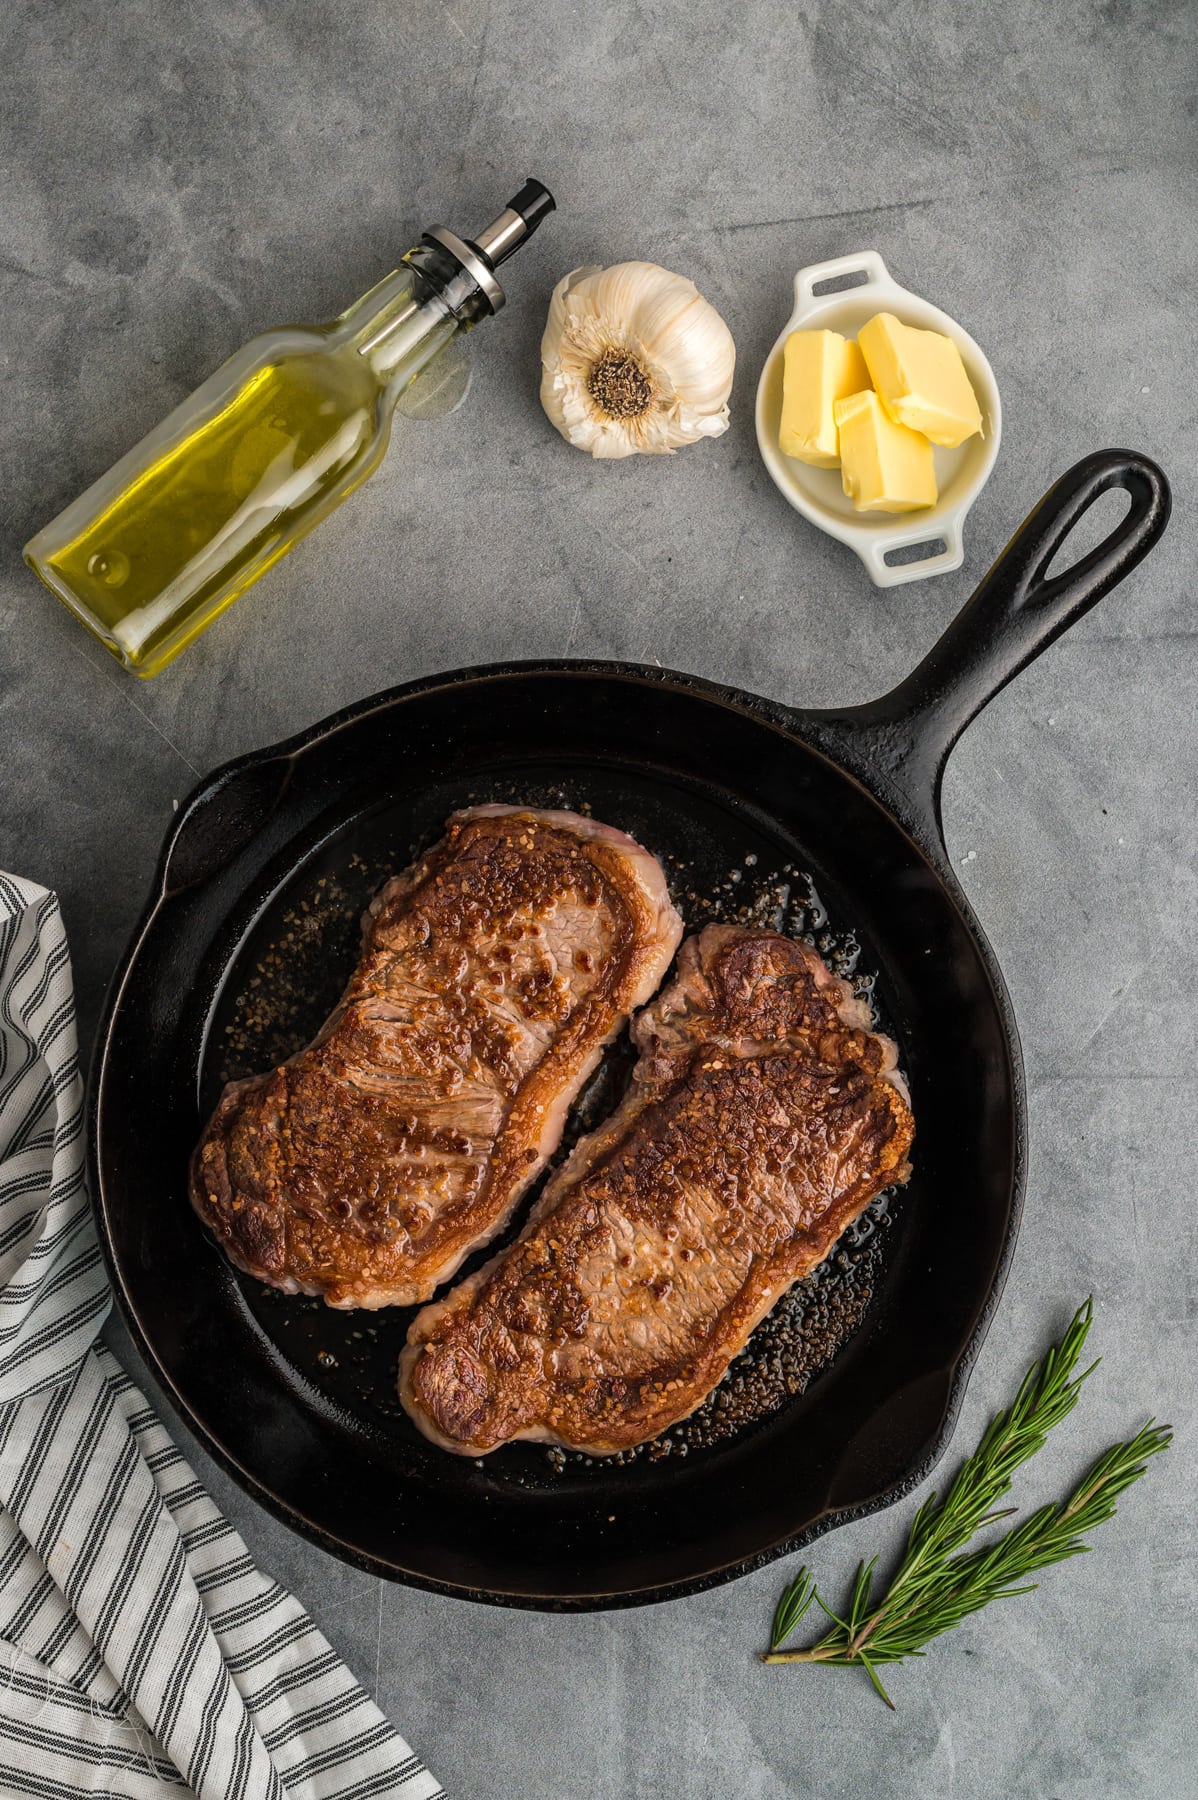 Two seared steaks in a cast iron skillet